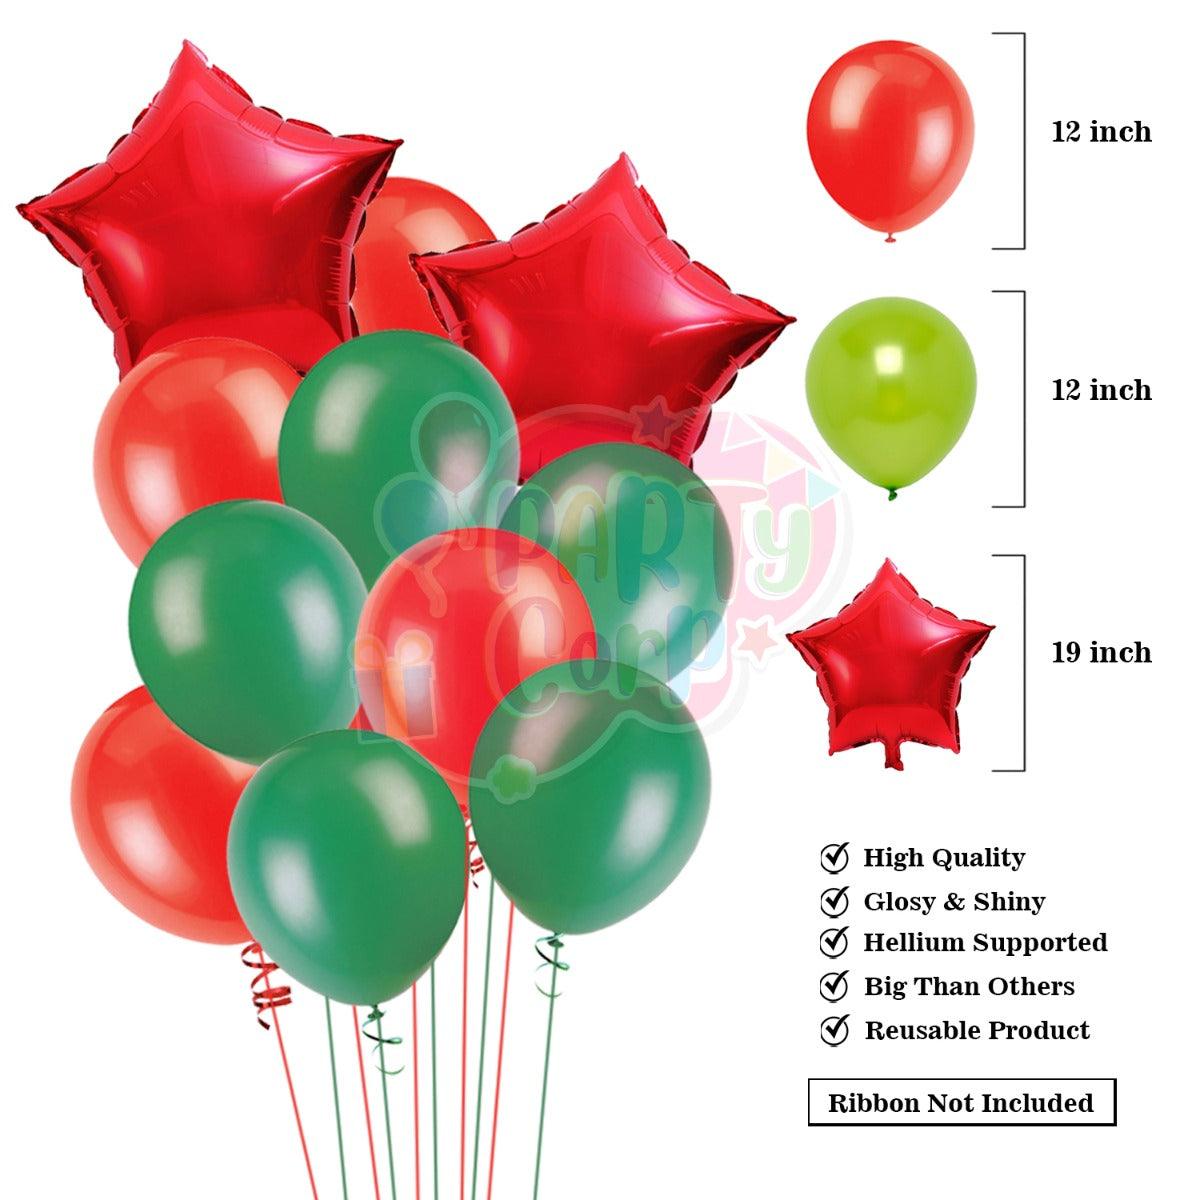 PartyCorp Merry Christmas Decoration Kit Combo 27 Pcs - Dark Green, Red Balloons, Gold Merry Christmas Foil Banner, Red Star Foil Balloon